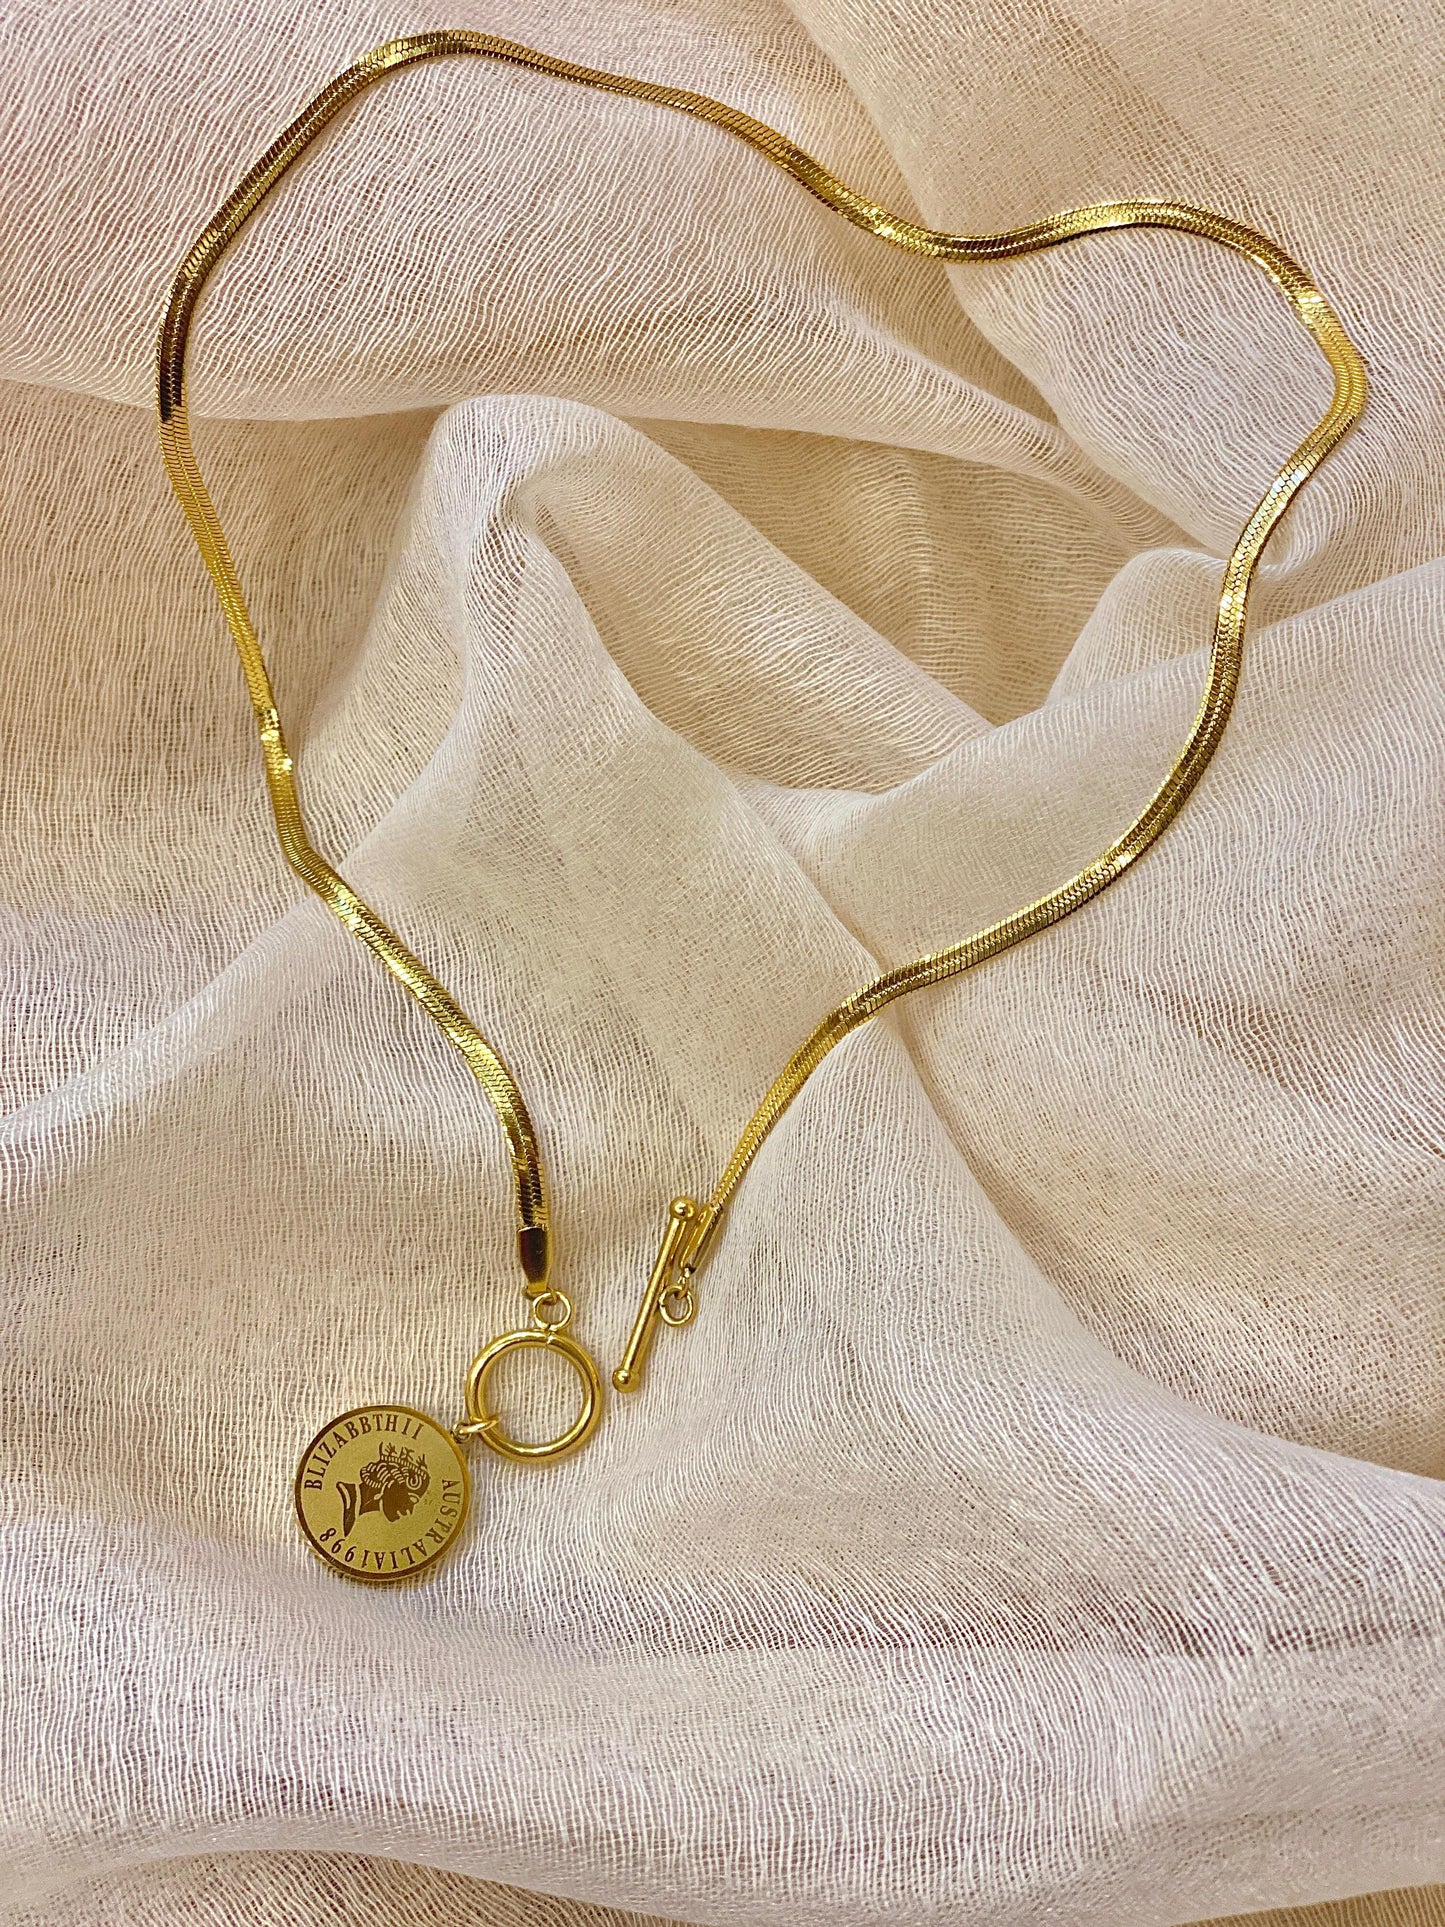 Gold Snake Chain Neckpiece With New Front Lock  Style